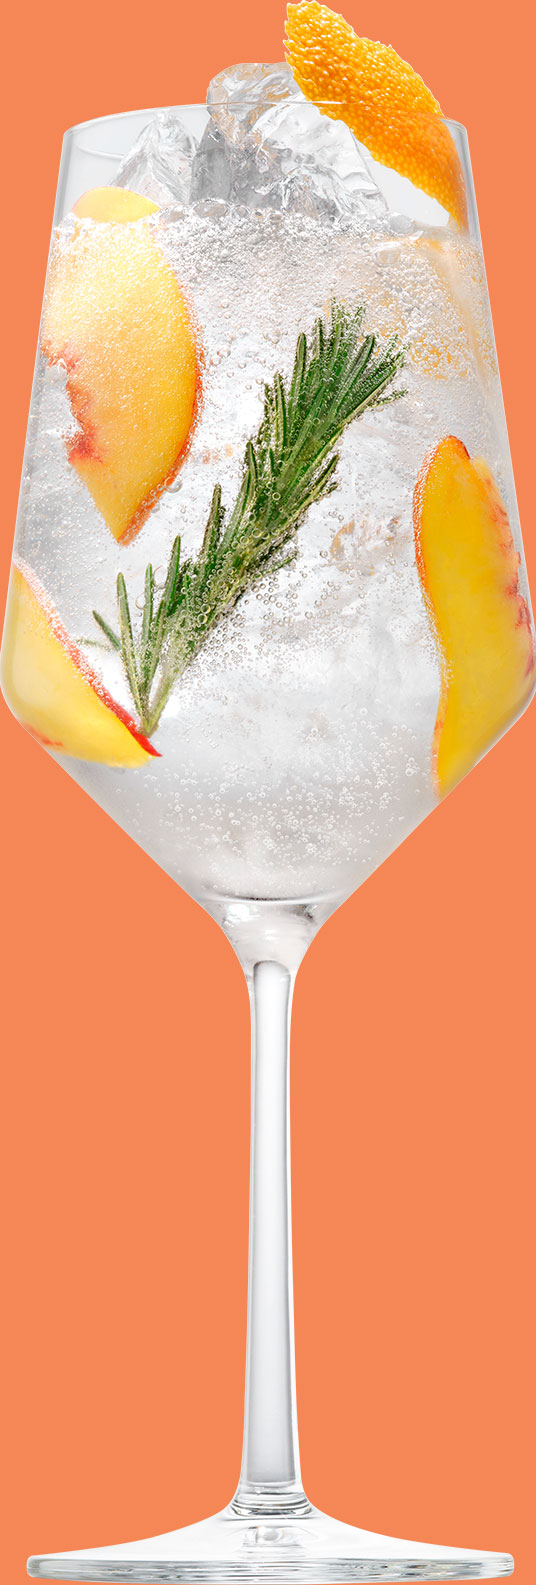 Glass of White Peach & Rosemary Essences cocktail